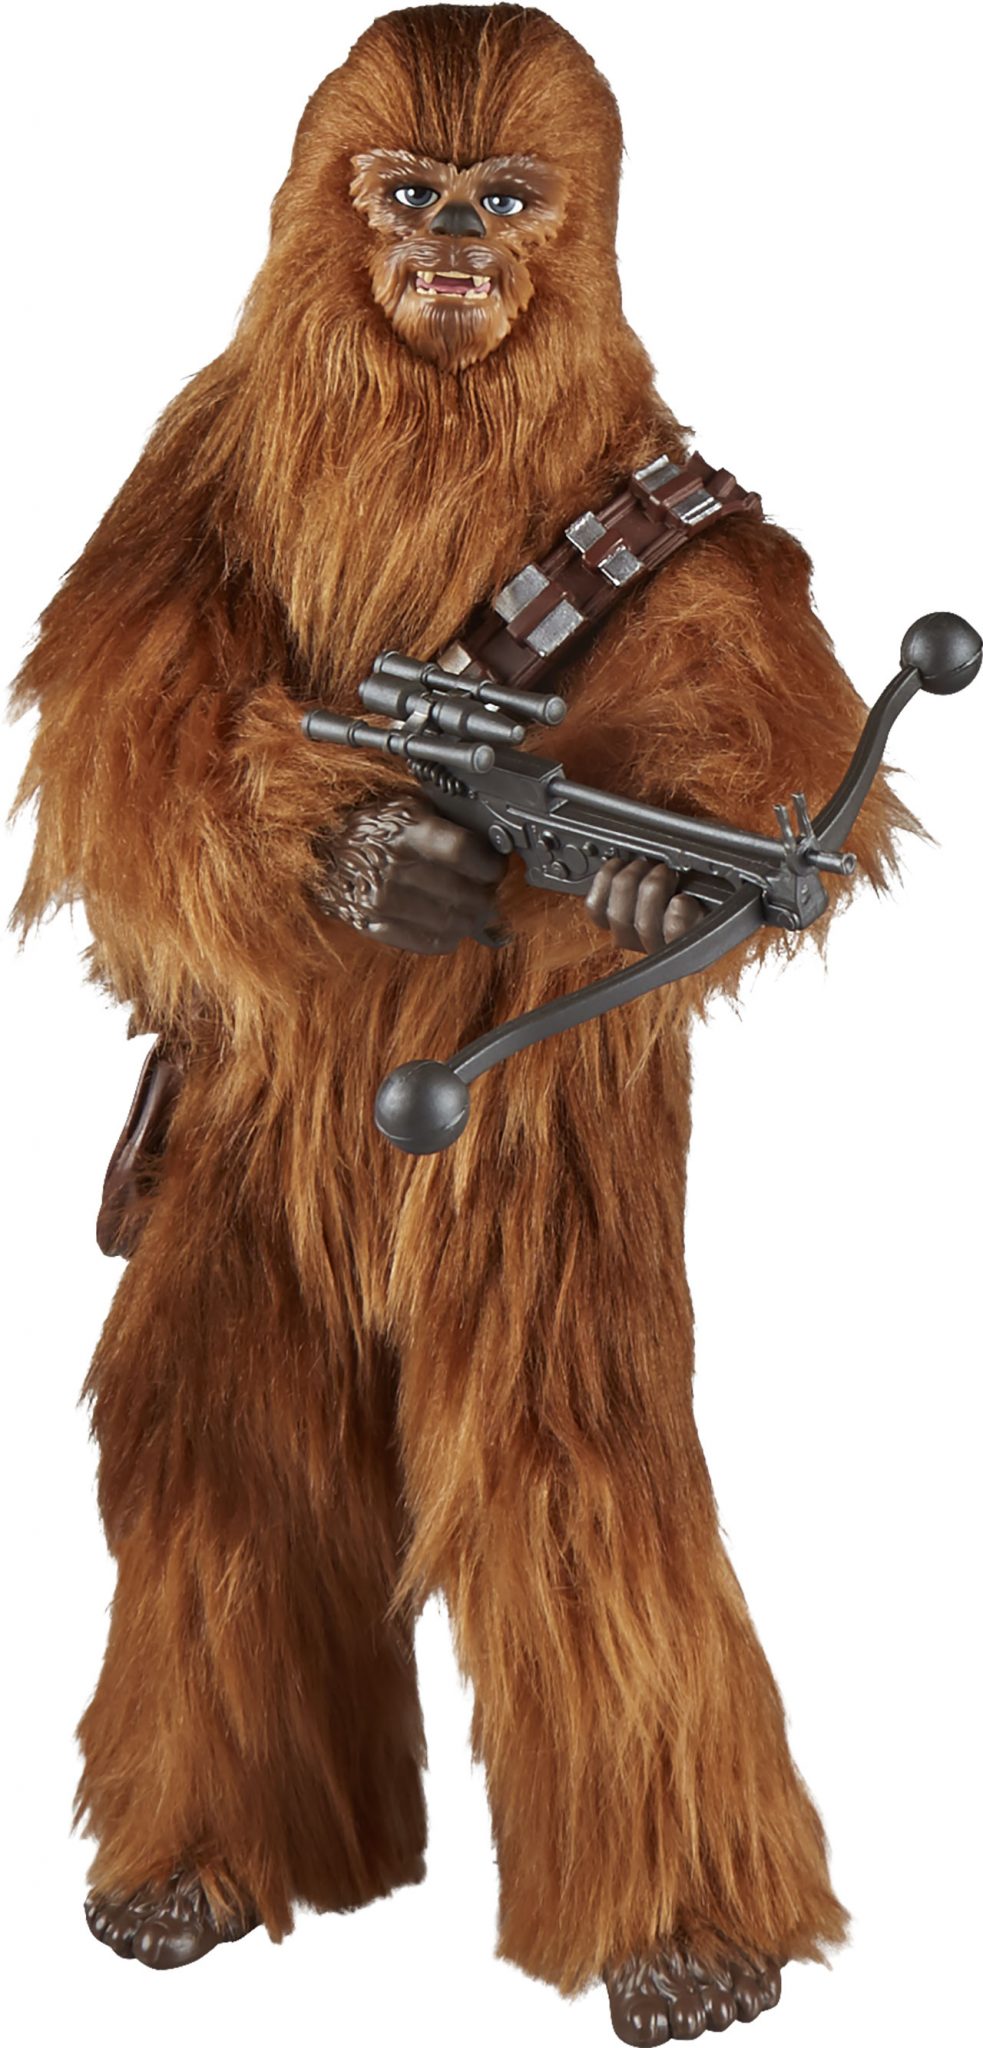 forces of destiny chewbacca